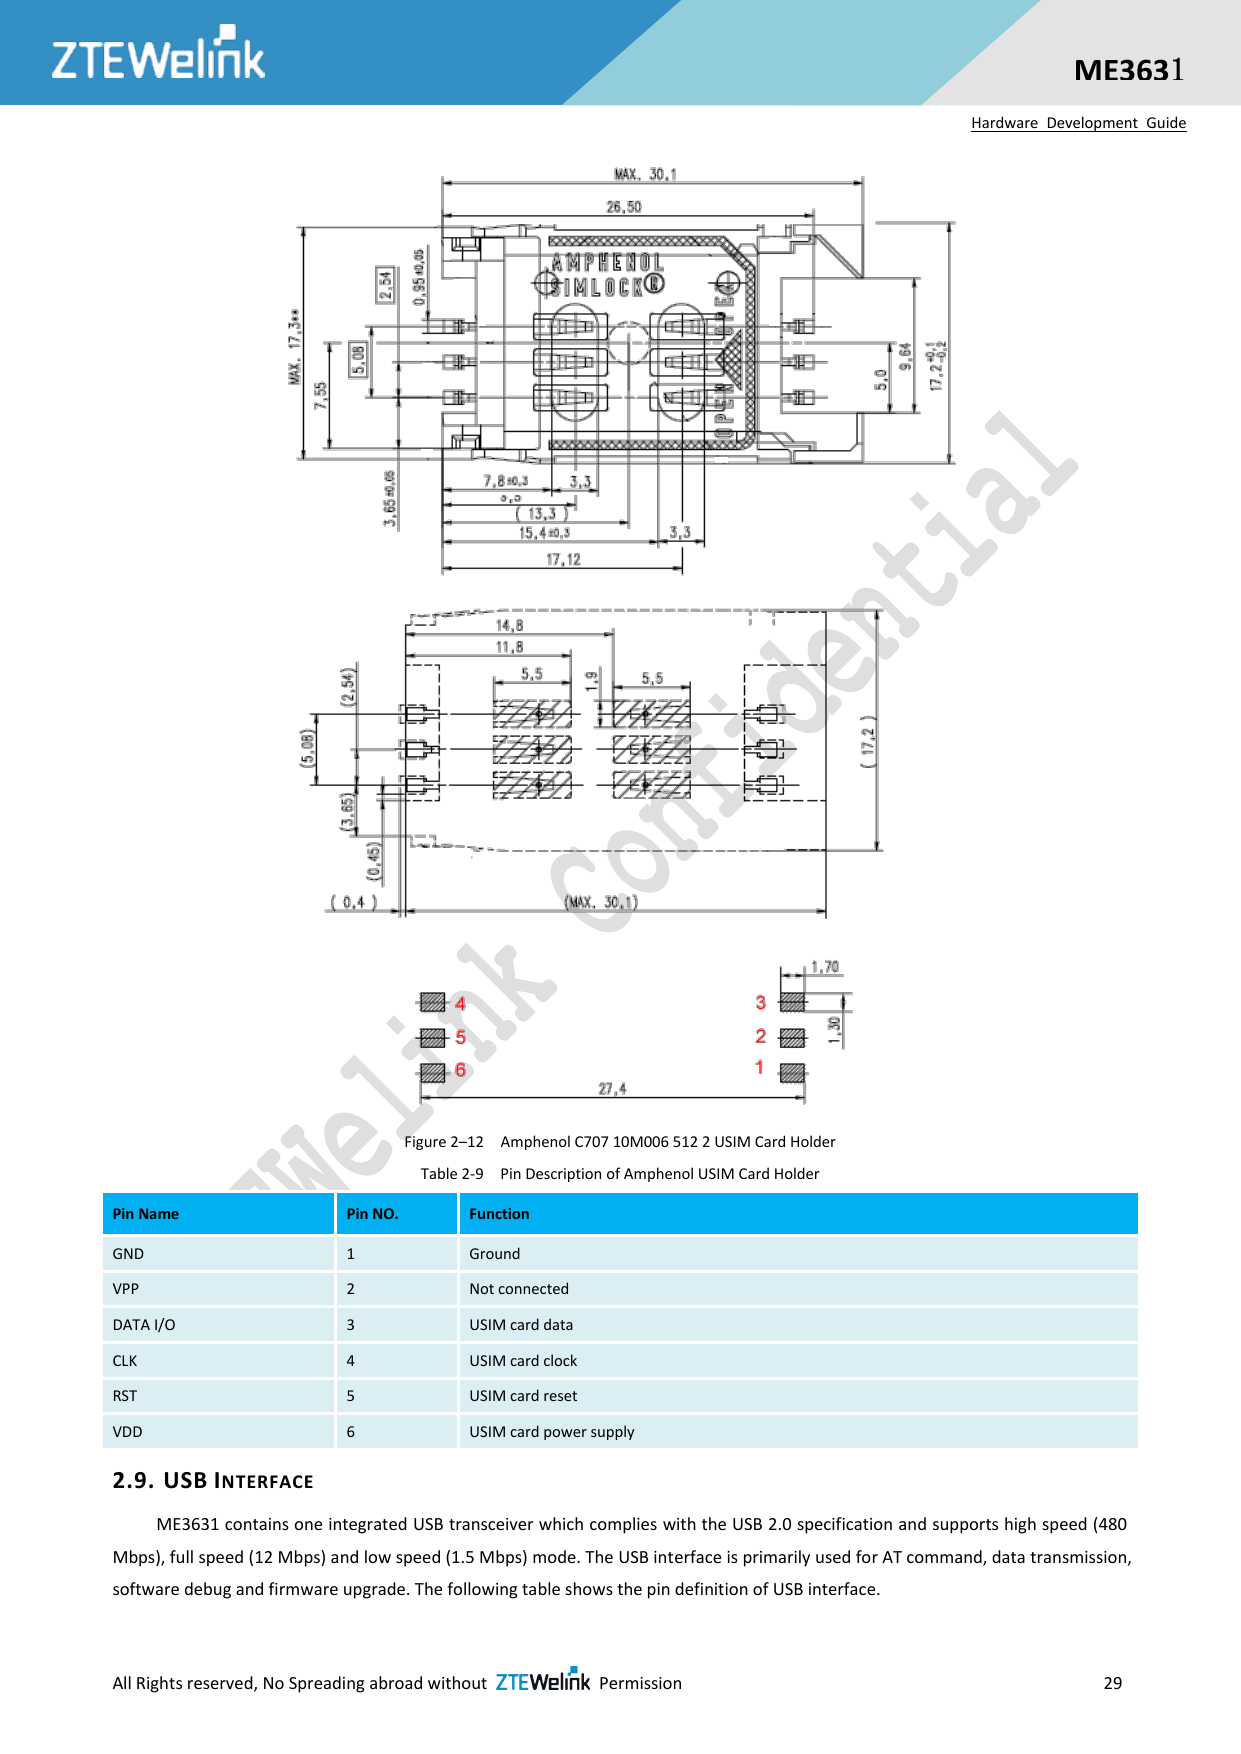  All Rights reserved, No Spreading abroad without    Permission                     29  ME3631 Hardware  Development  Guide  Figure 2–12  Amphenol C707 10M006 512 2 USIM Card Holder   Table 2-9  Pin Description of Amphenol USIM Card Holder Pin Name Pin NO. Function GND 1 Ground VPP 2 Not connected DATA I/O 3 USIM card data CLK 4 USIM card clock RST 5 USIM card reset VDD 6 USIM card power supply 2.9. USB INTERFACE ME3631 contains one integrated USB transceiver which complies with the USB 2.0 specification and supports high speed (480 Mbps), full speed (12 Mbps) and low speed (1.5 Mbps) mode. The USB interface is primarily used for AT command, data transmission, software debug and firmware upgrade. The following table shows the pin definition of USB interface. 